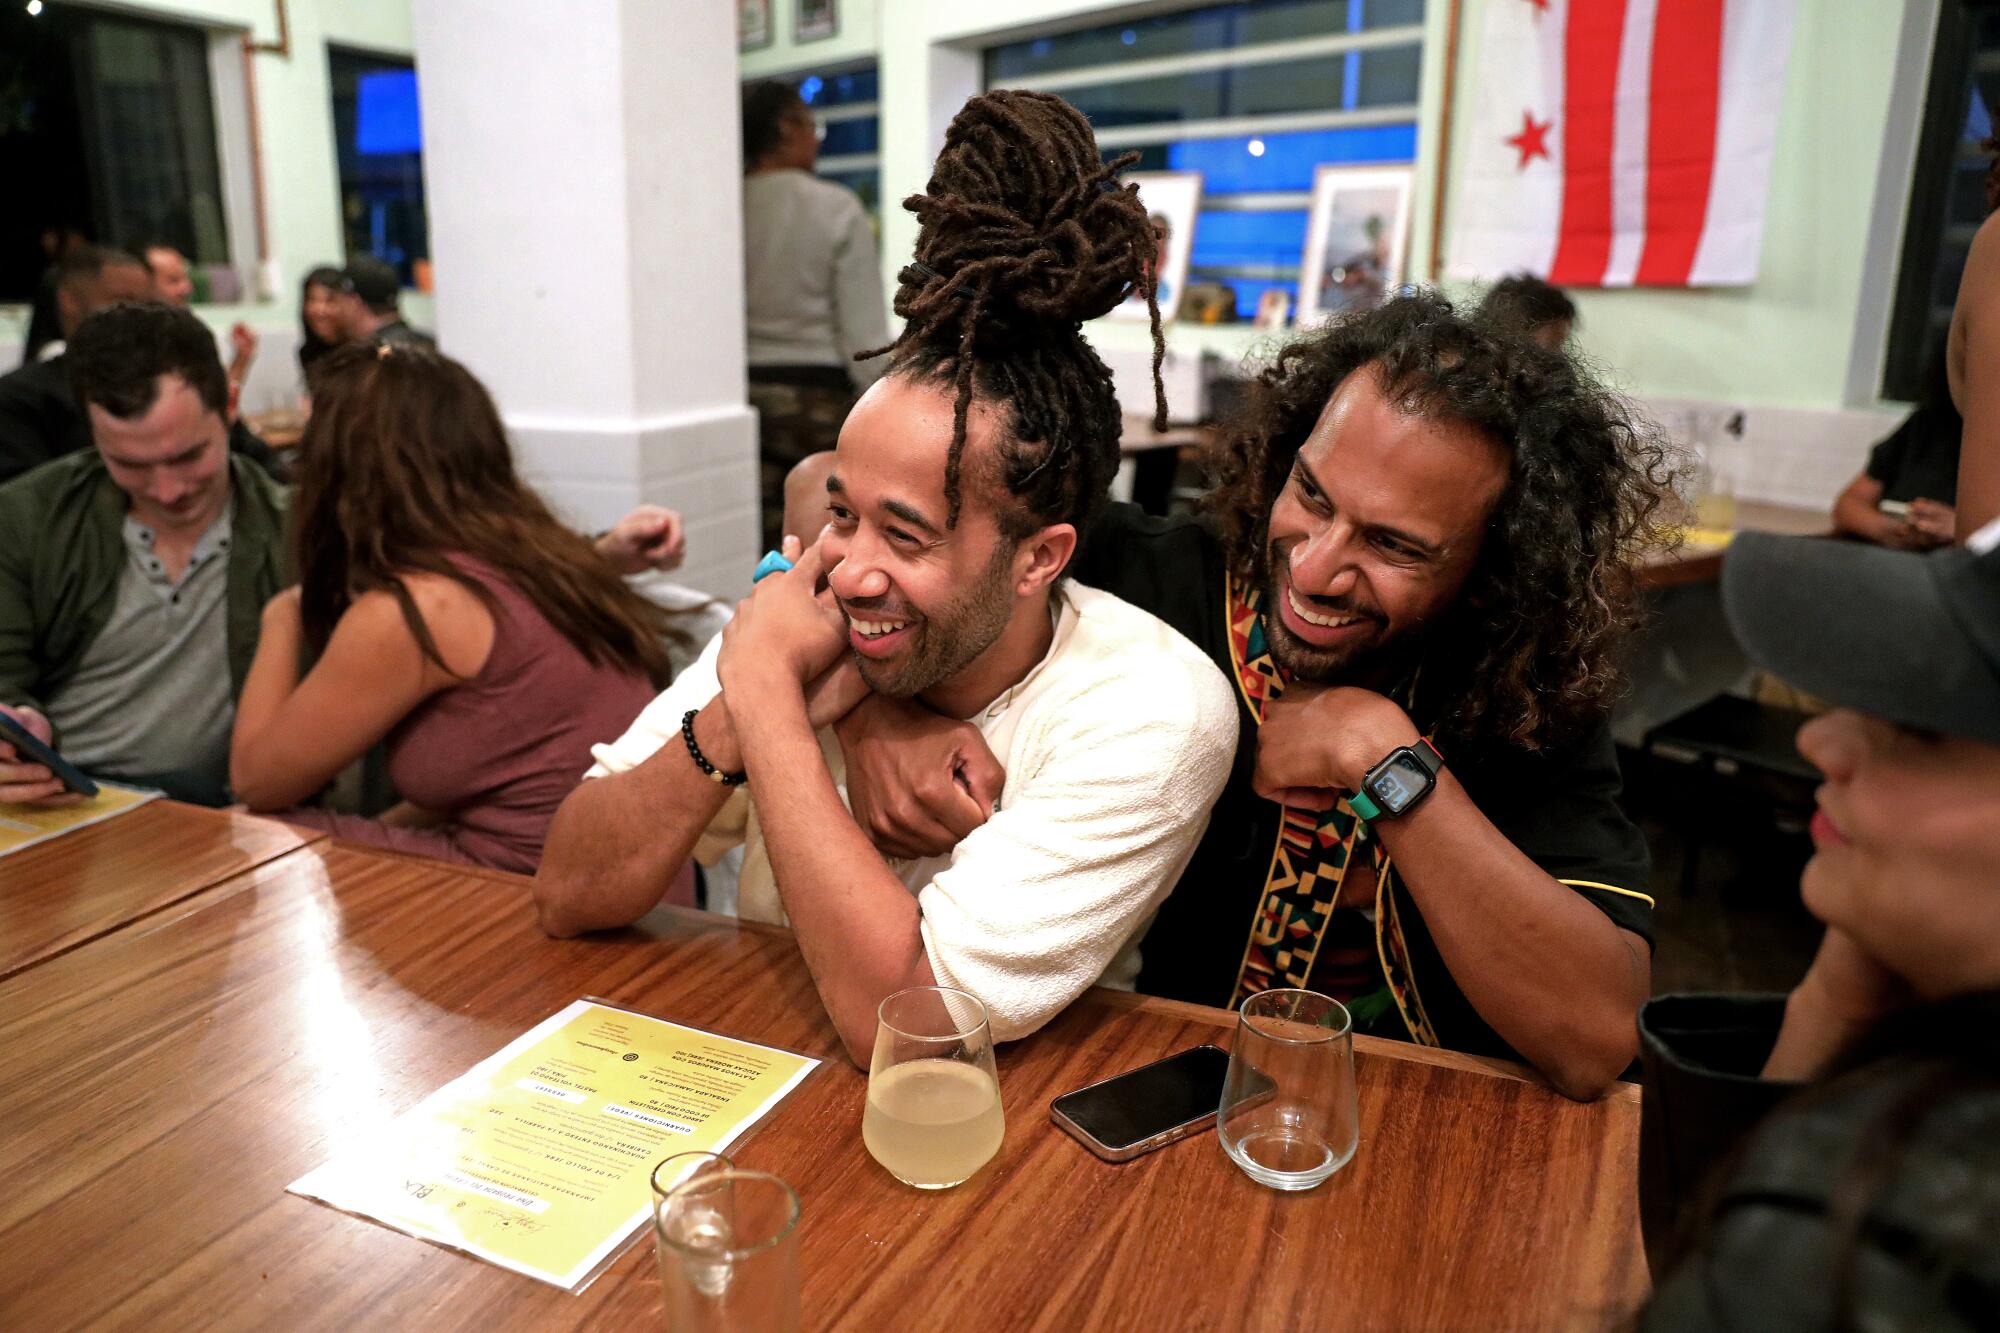 Two Black men smile and sit together at a restaurant table.